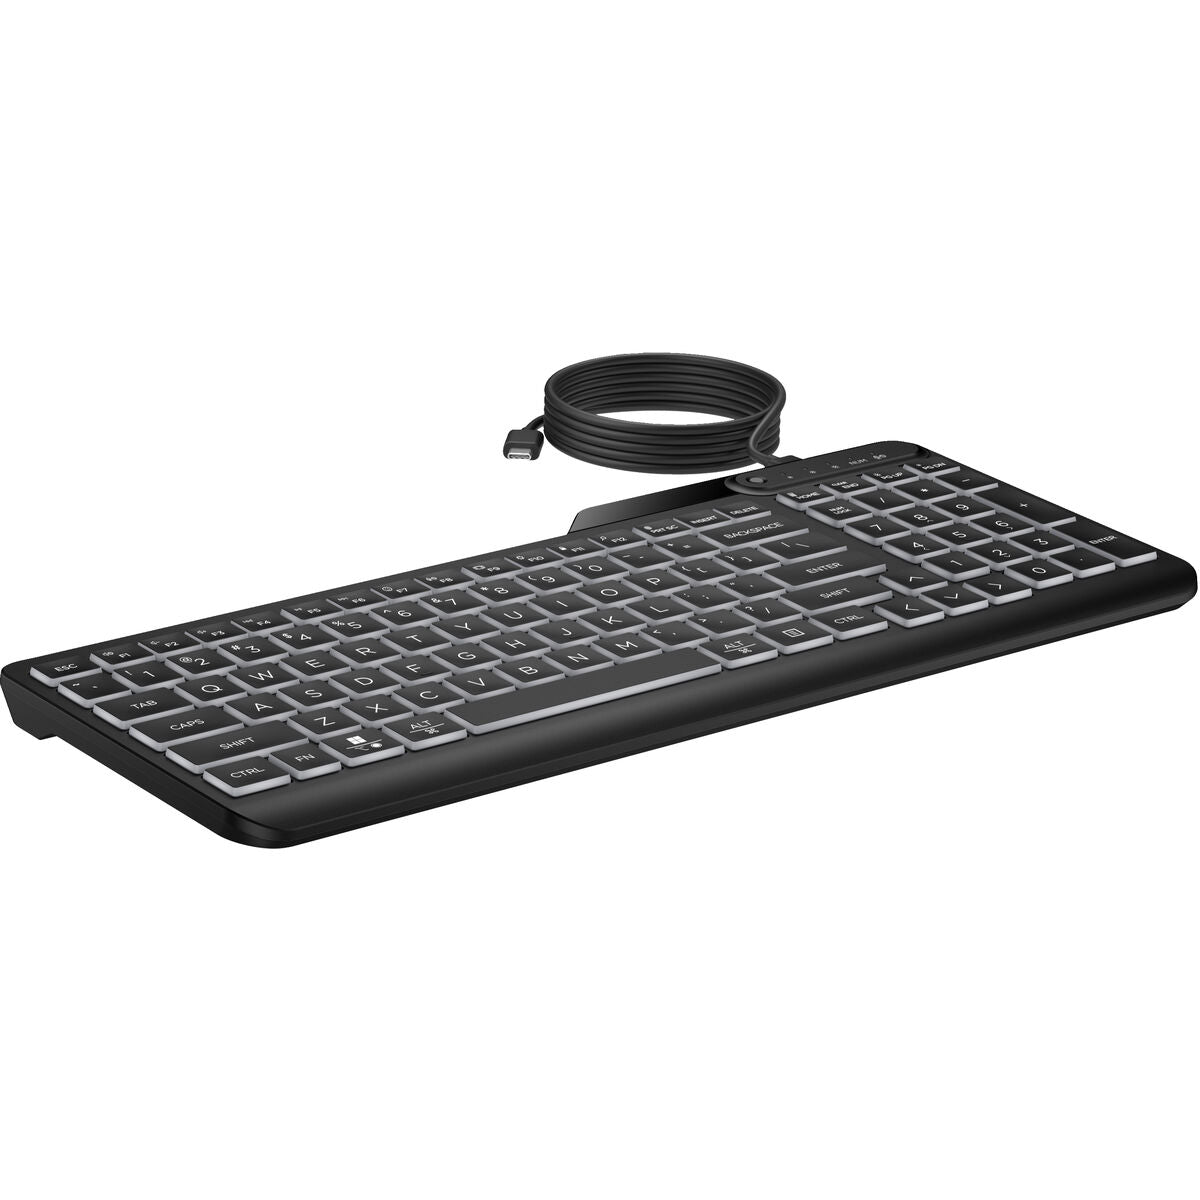 Keyboard and Mouse HP 405 Black Qwerty US, HP, Computing, Accessories, keyboard-and-mouse-hp-405-black-qwerty-us, Brand_HP, category-reference-2609, category-reference-2642, category-reference-2646, category-reference-t-19685, category-reference-t-19908, category-reference-t-21353, category-reference-t-25625, computers / peripherals, Condition_NEW, office, Price_50 - 100, Teleworking, RiotNook